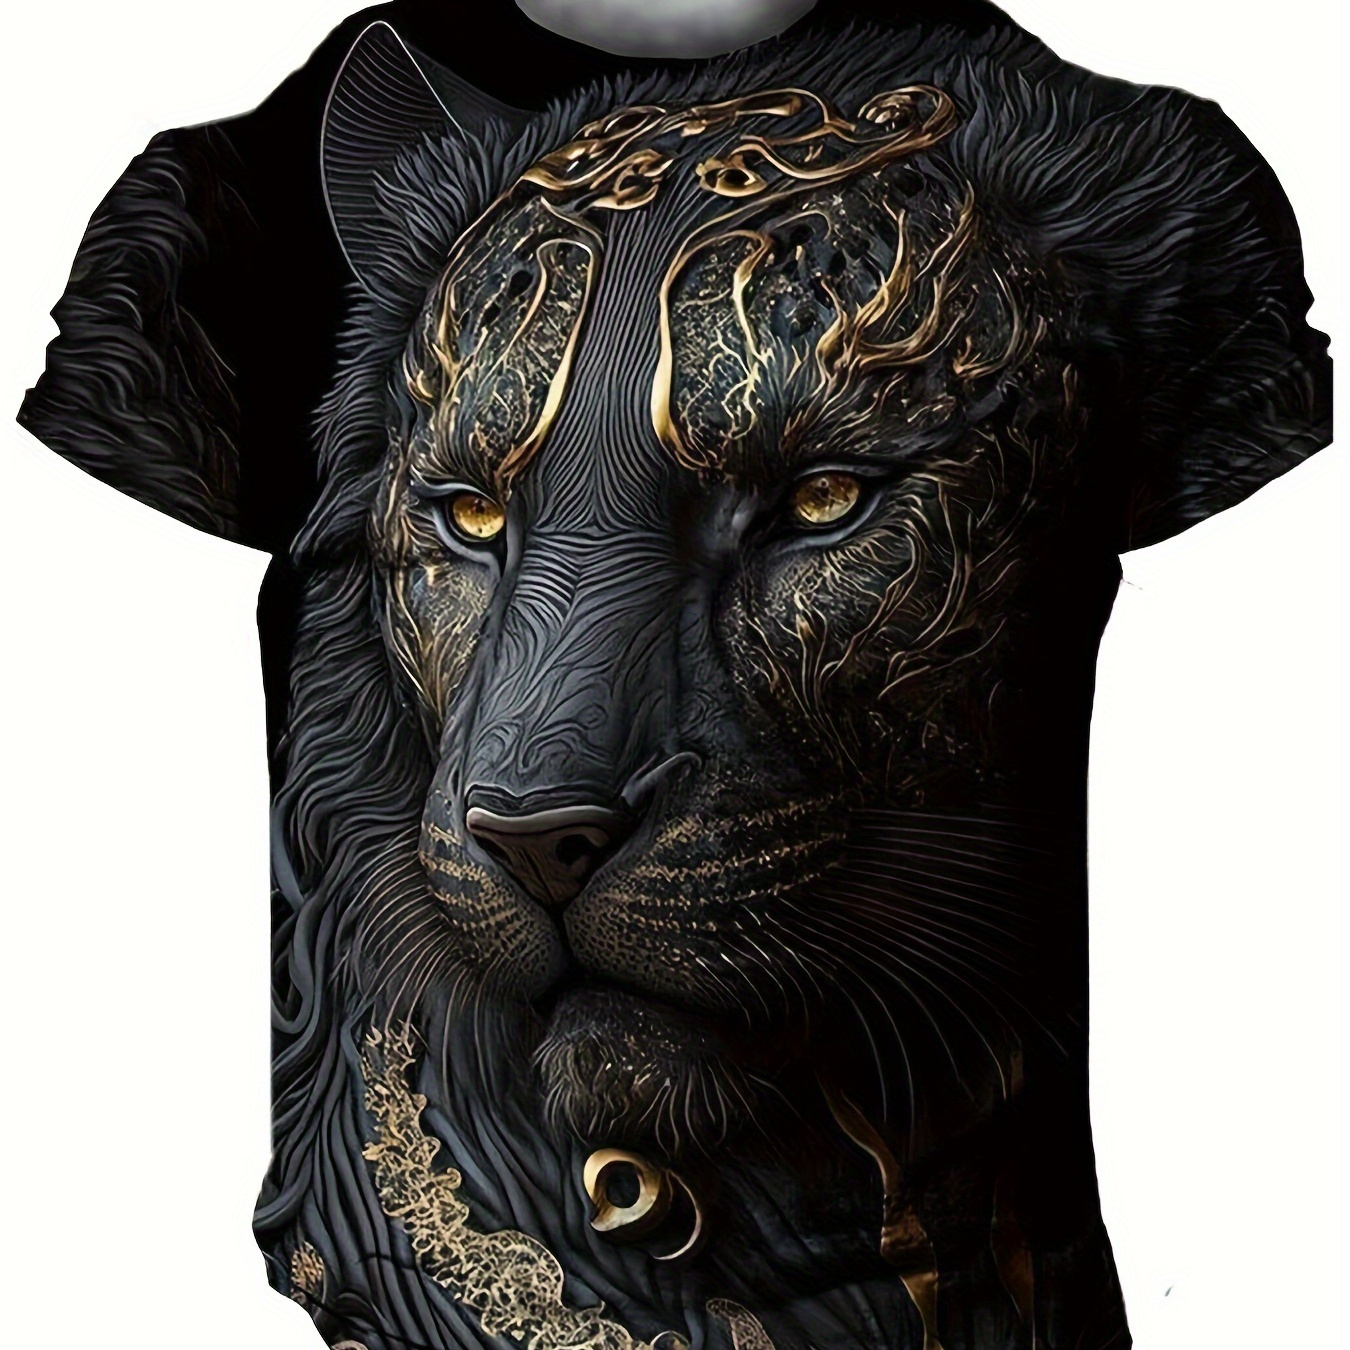 

Men's Stylish Tiger Pattern Shirt, Casual Slightly Stretch Breathable Crew Neck Short Sleeve Tee Top For City Walk Street Hanging Outdoor Activities